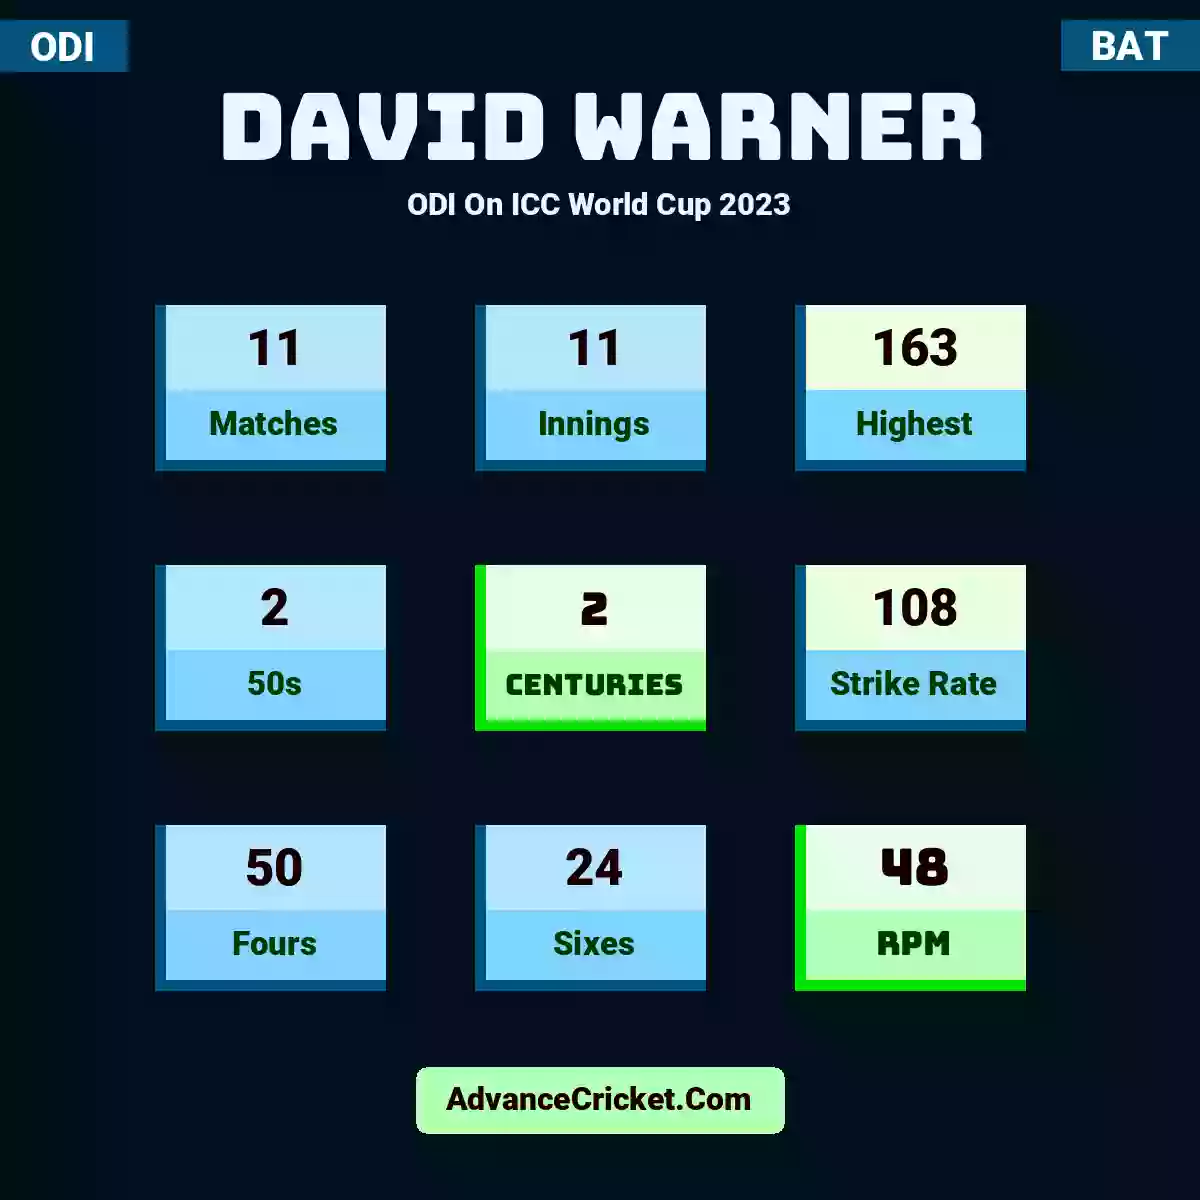 David Warner ODI  On ICC World Cup 2023, David Warner played 11 matches, scored 163 runs as highest, 2 half-centuries, and 2 centuries, with a strike rate of 108. D.Warner hit 50 fours and 24 sixes, with an RPM of 48.